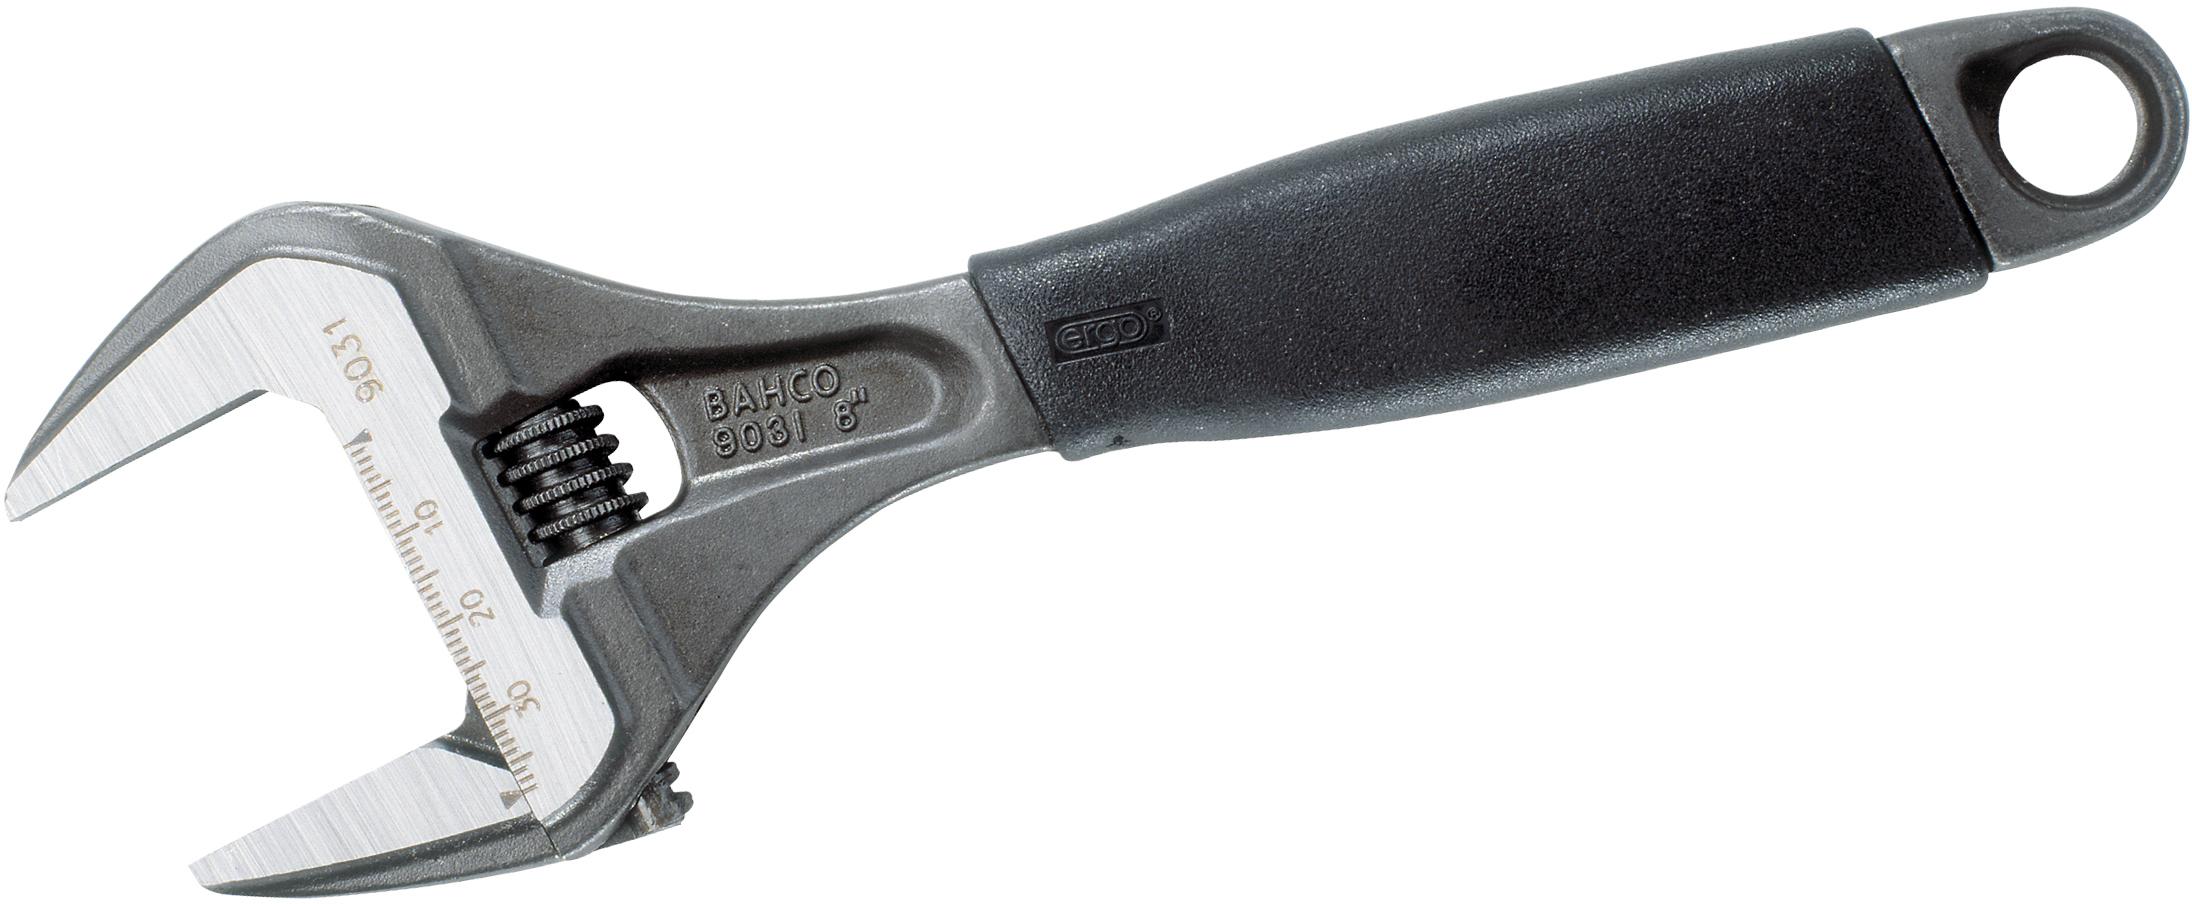 Bahco Adjustable Wrench 8 Inch 9031 38Mm